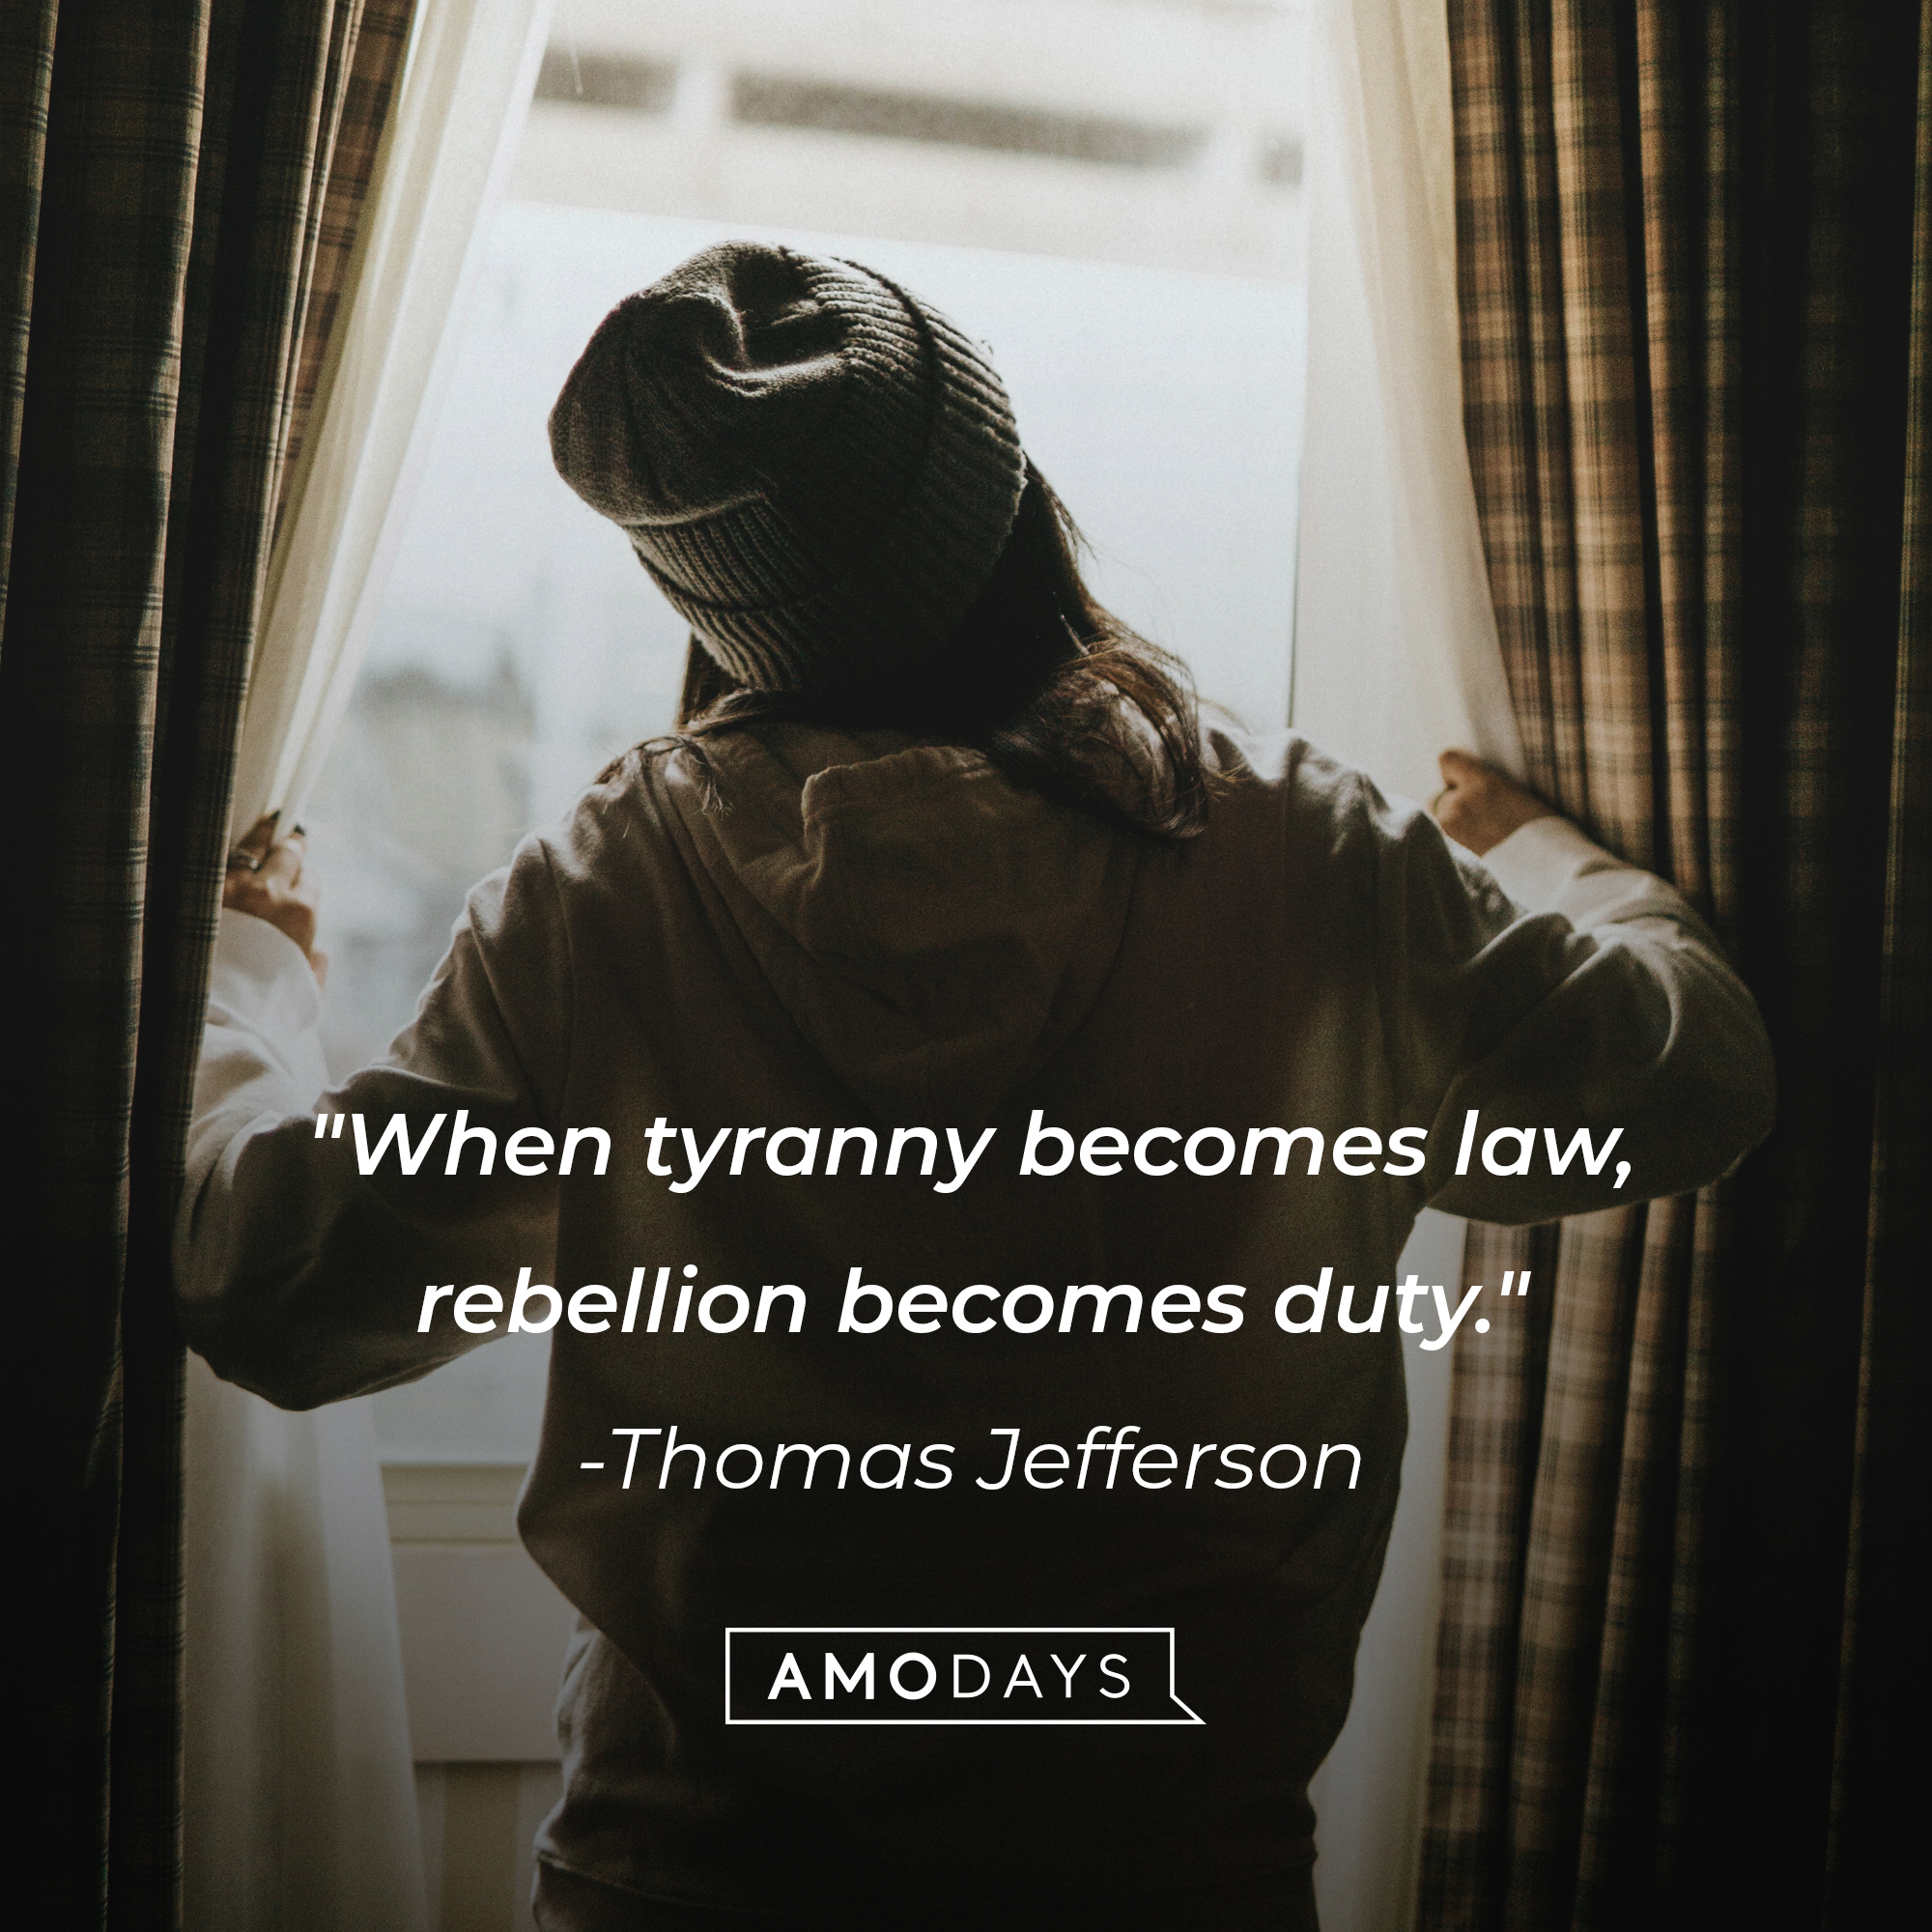 Thomas Jefferson's quote: "When tyranny becomes law, rebellion becomes duty." | Image: AmoDays